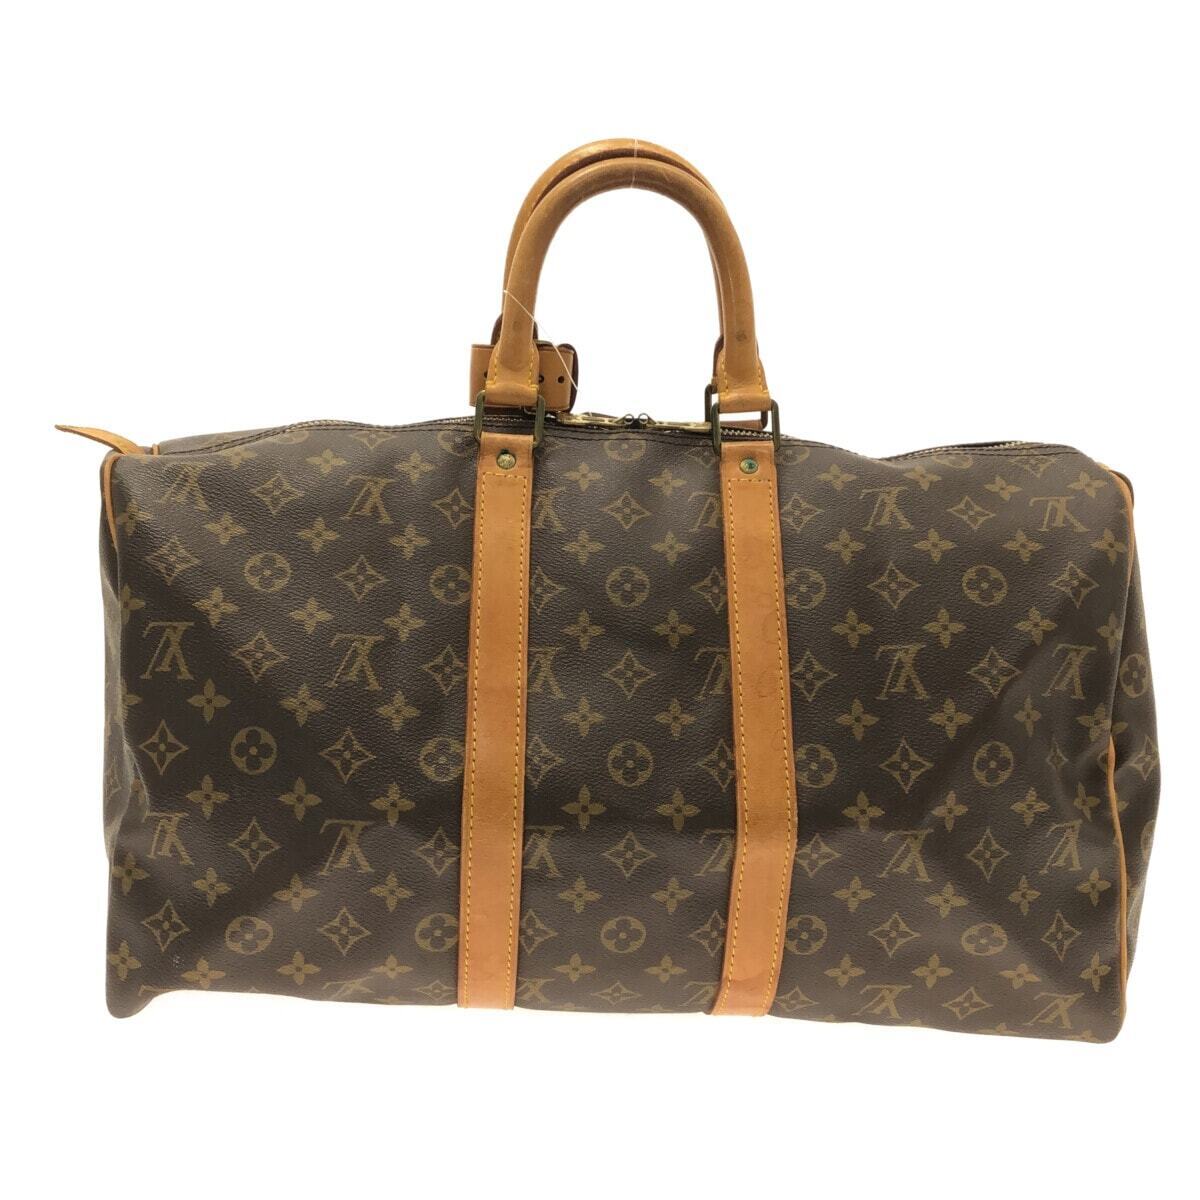 Authentic Louis Vuitton Keepall 45 Travel Bag with luggage tag for